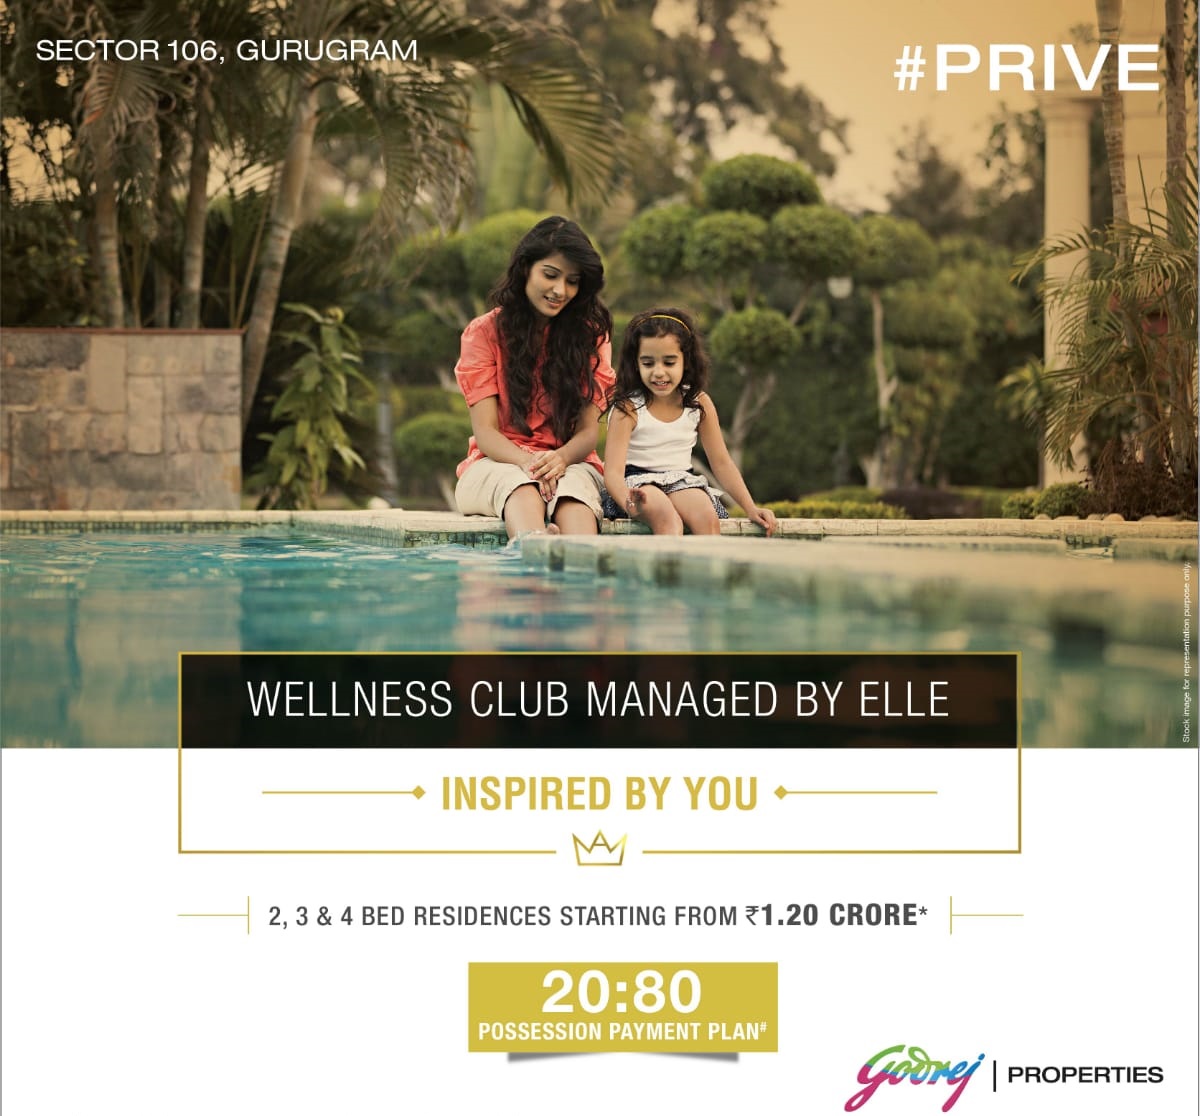 2, 3 and 4 bed residences starting from Rs 1.20 Cr at Godrej Prive in Gurgaon Update